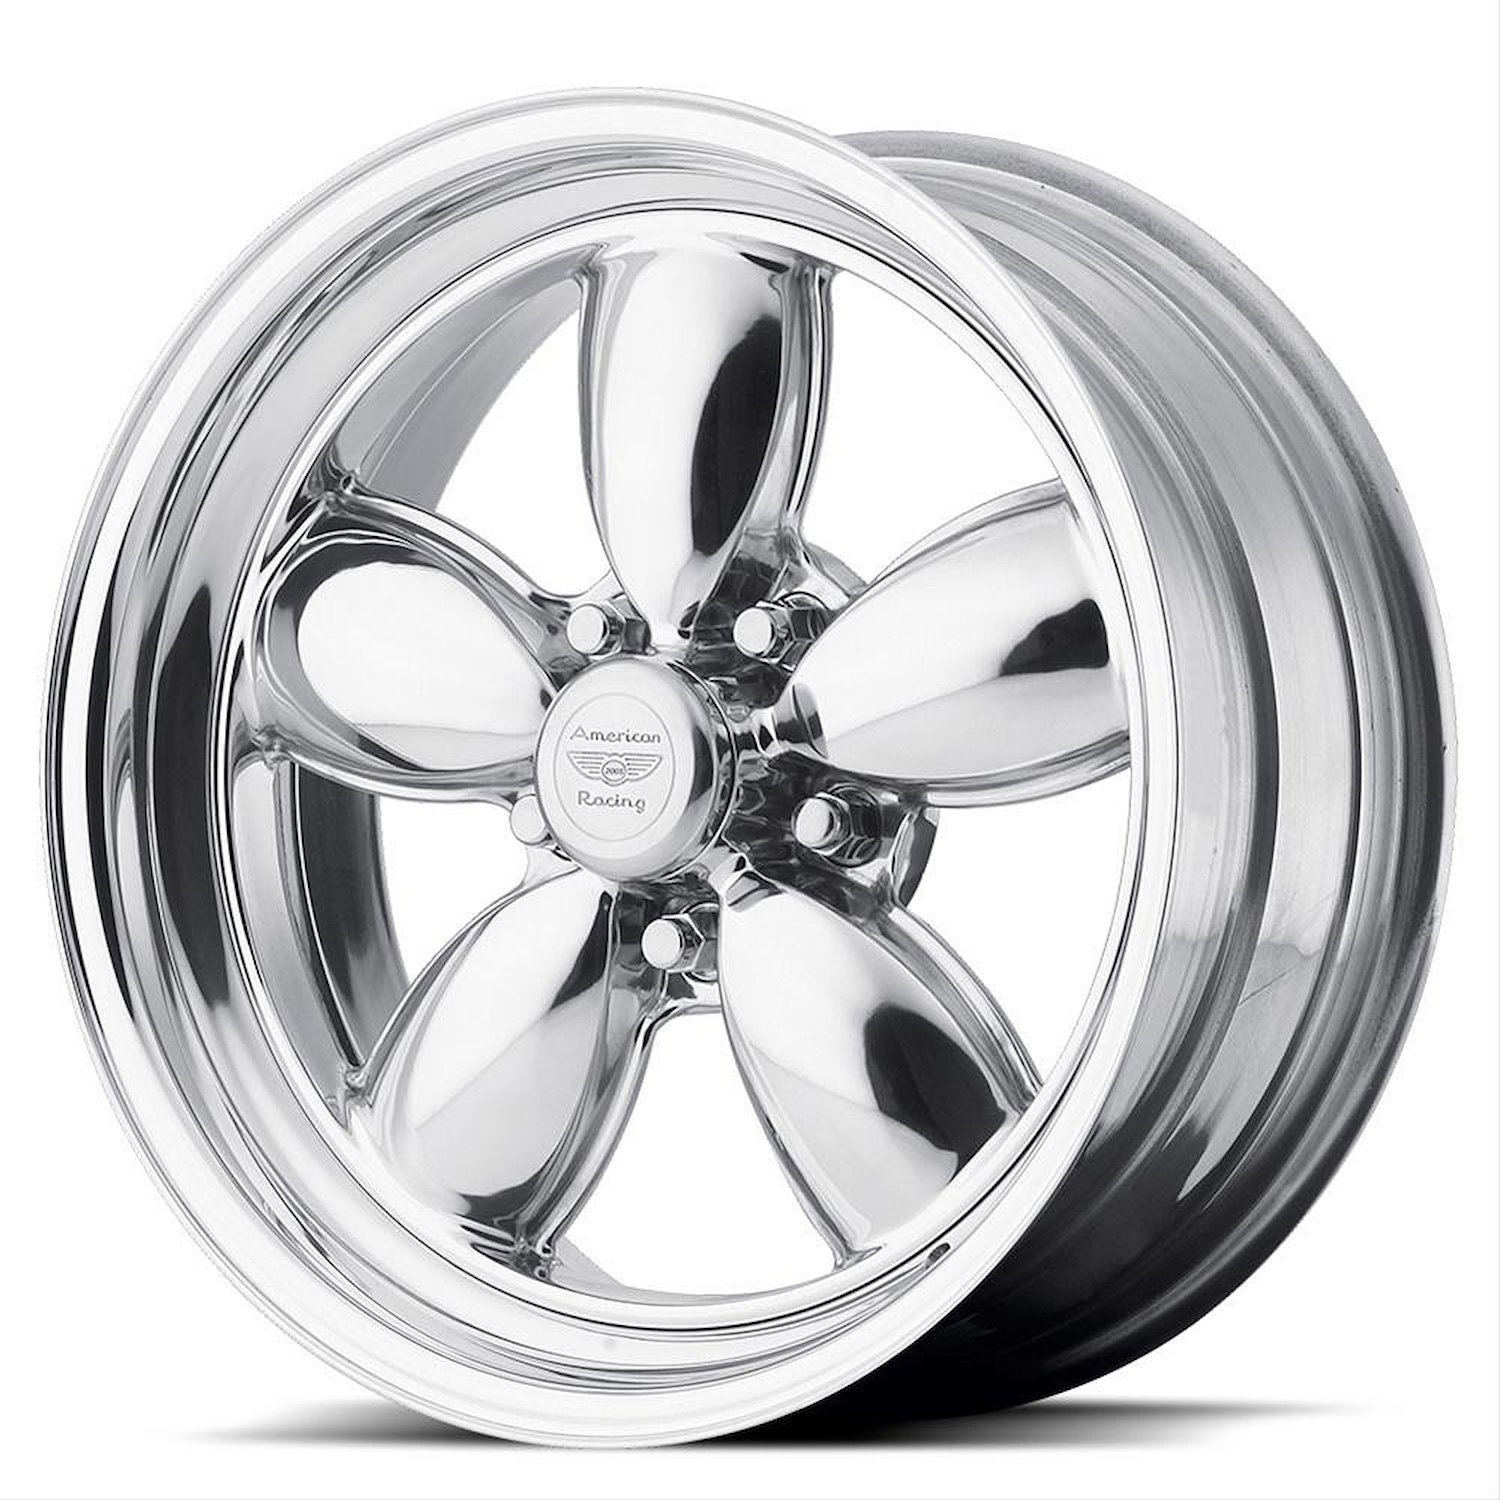 AMERICAN RACING CLASSIC 200S TWO-PIECE POLISHED 17 x 9.5 5X4.75 38 6.75